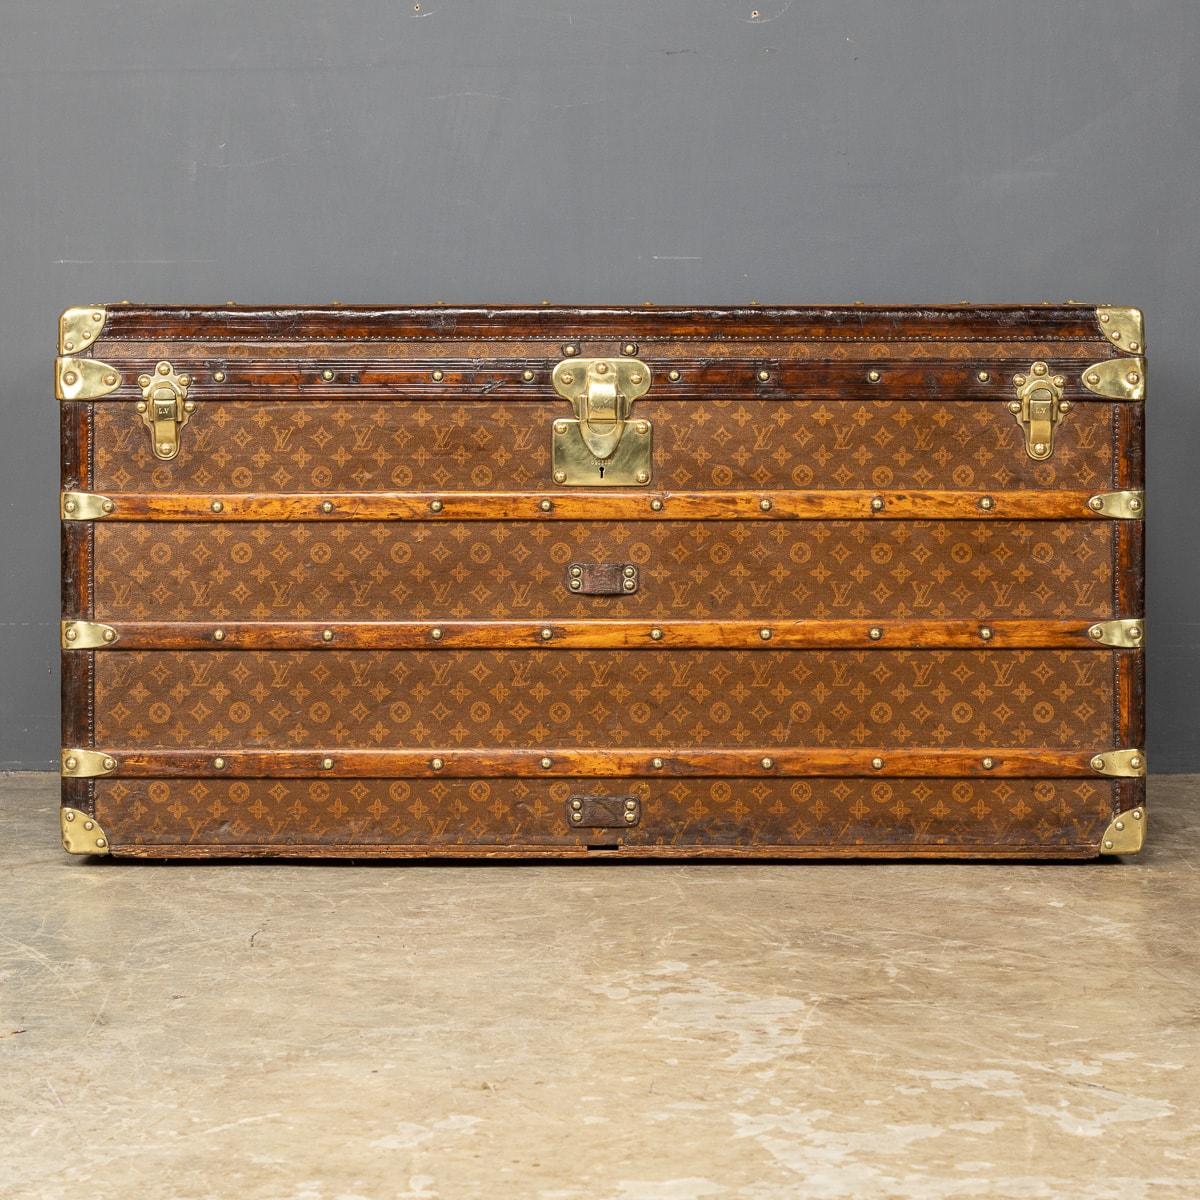 Antique 20th Century large monogramed canvas trunk from Louis Vuitton lined in ecru calico with two full width trays. The handles and fittings are all original brass.
Around the turn of the 19th and 20th century Louis Vuitton had established himself